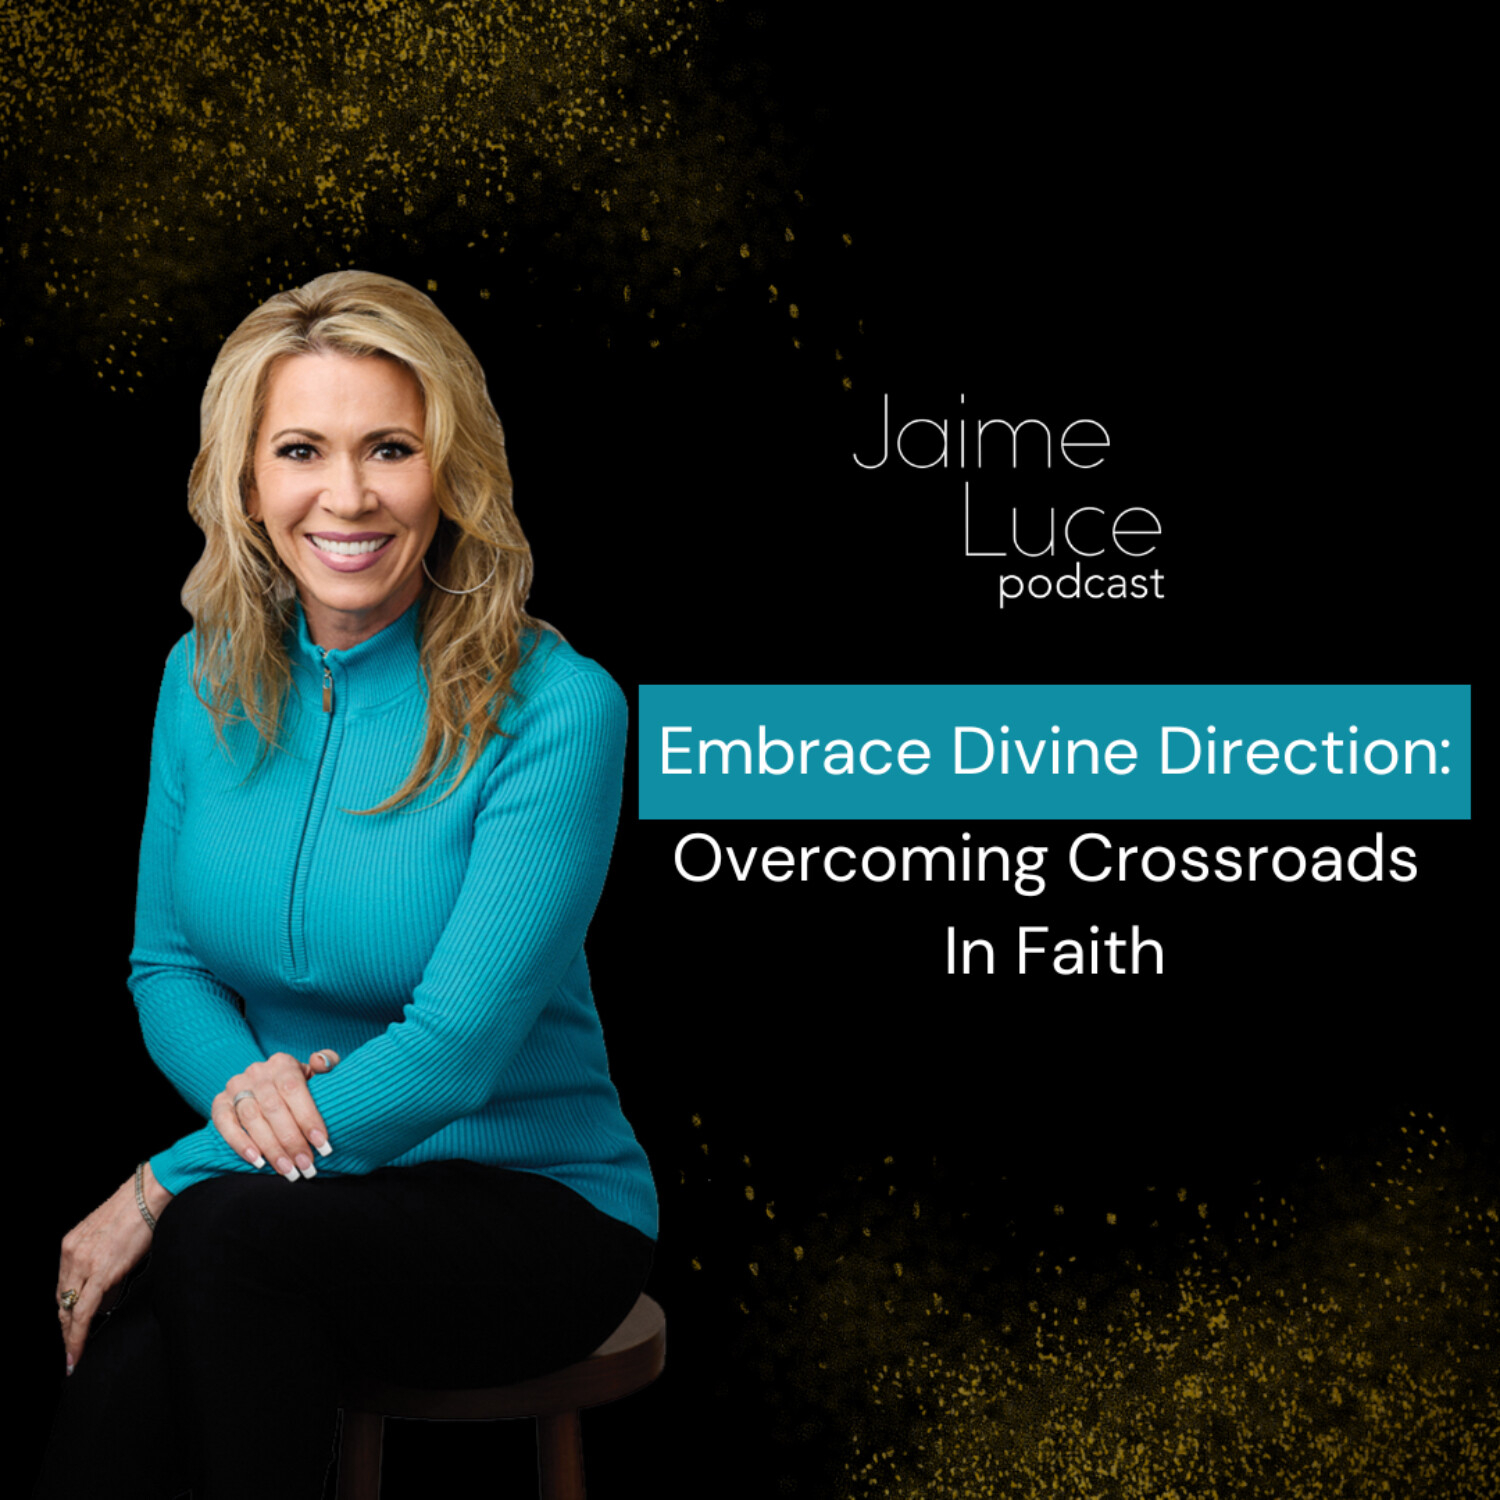 Embrace Divine Direction: Overcoming Crossroads In Faith